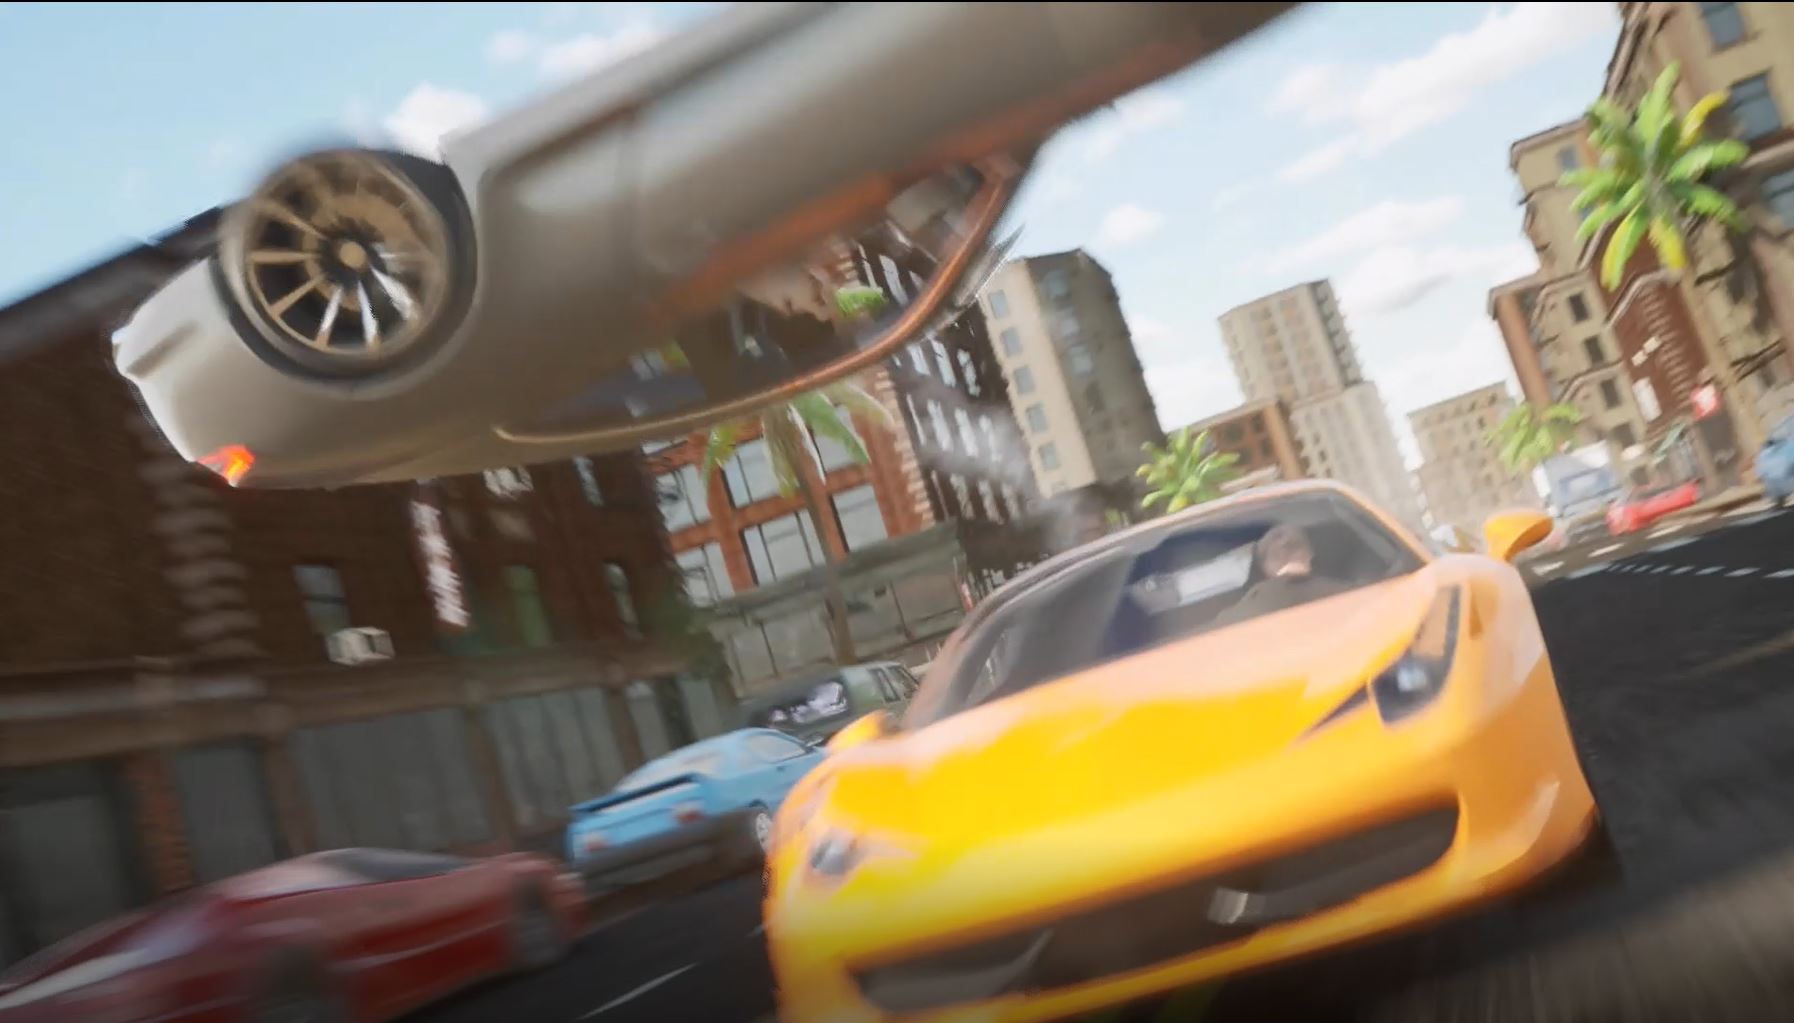 A blurred Image of a yellow car with a grey car above flying in the air